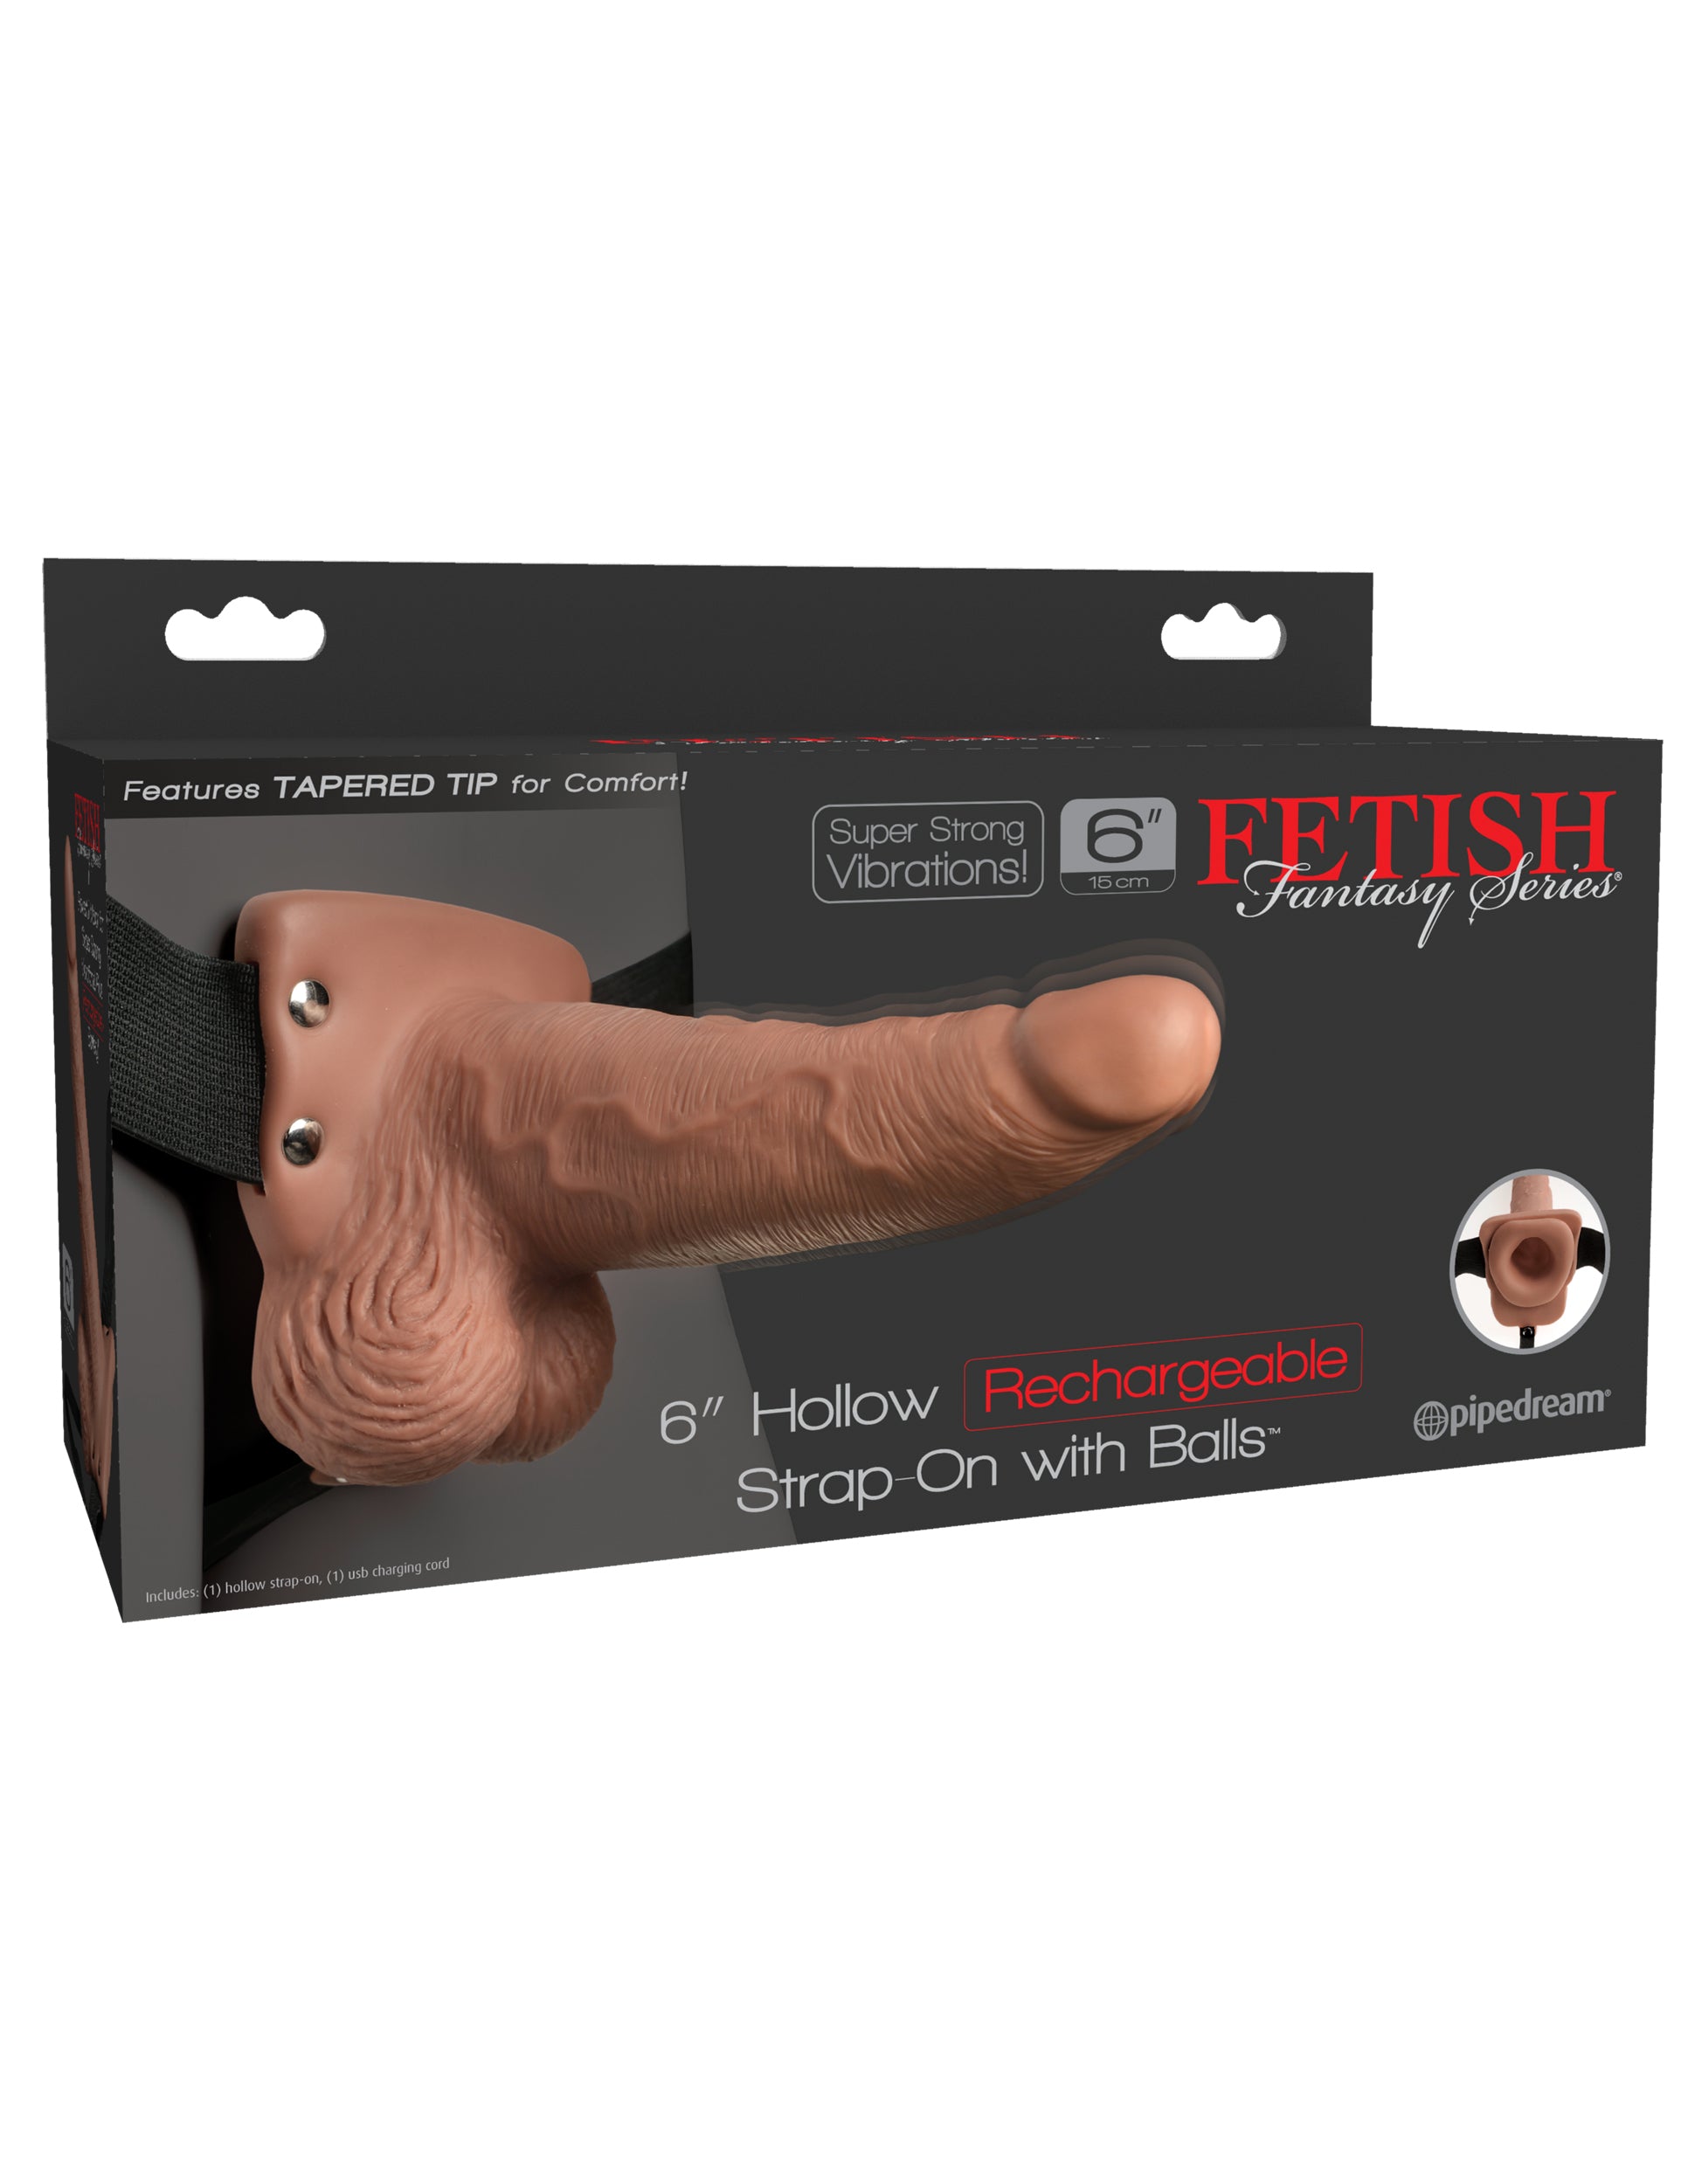 Fetish Fantasy Series 6" Hollow Rechargeable Strap-on With Balls - Tan PD3395-22